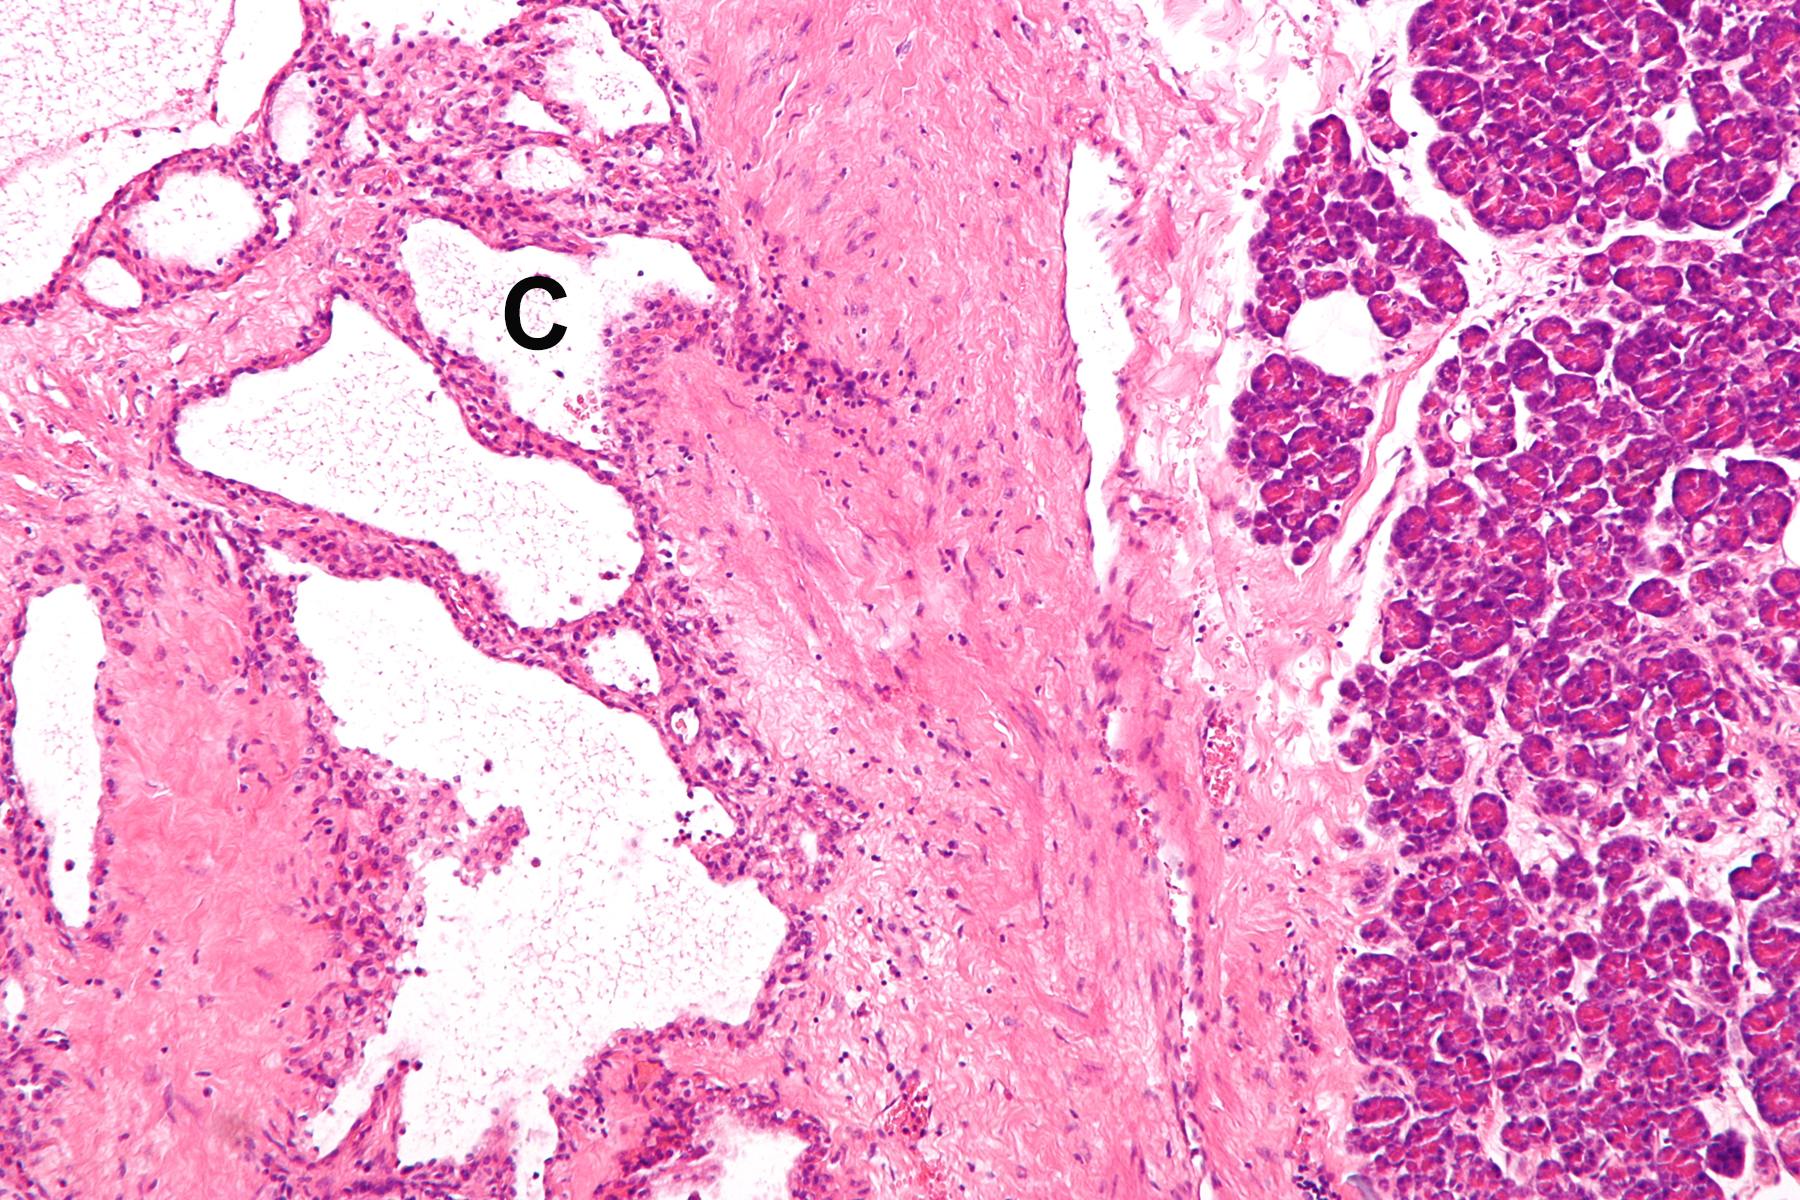 Histologic appearance showing tumor with small cysts on the left; normal pancreas on the right. 